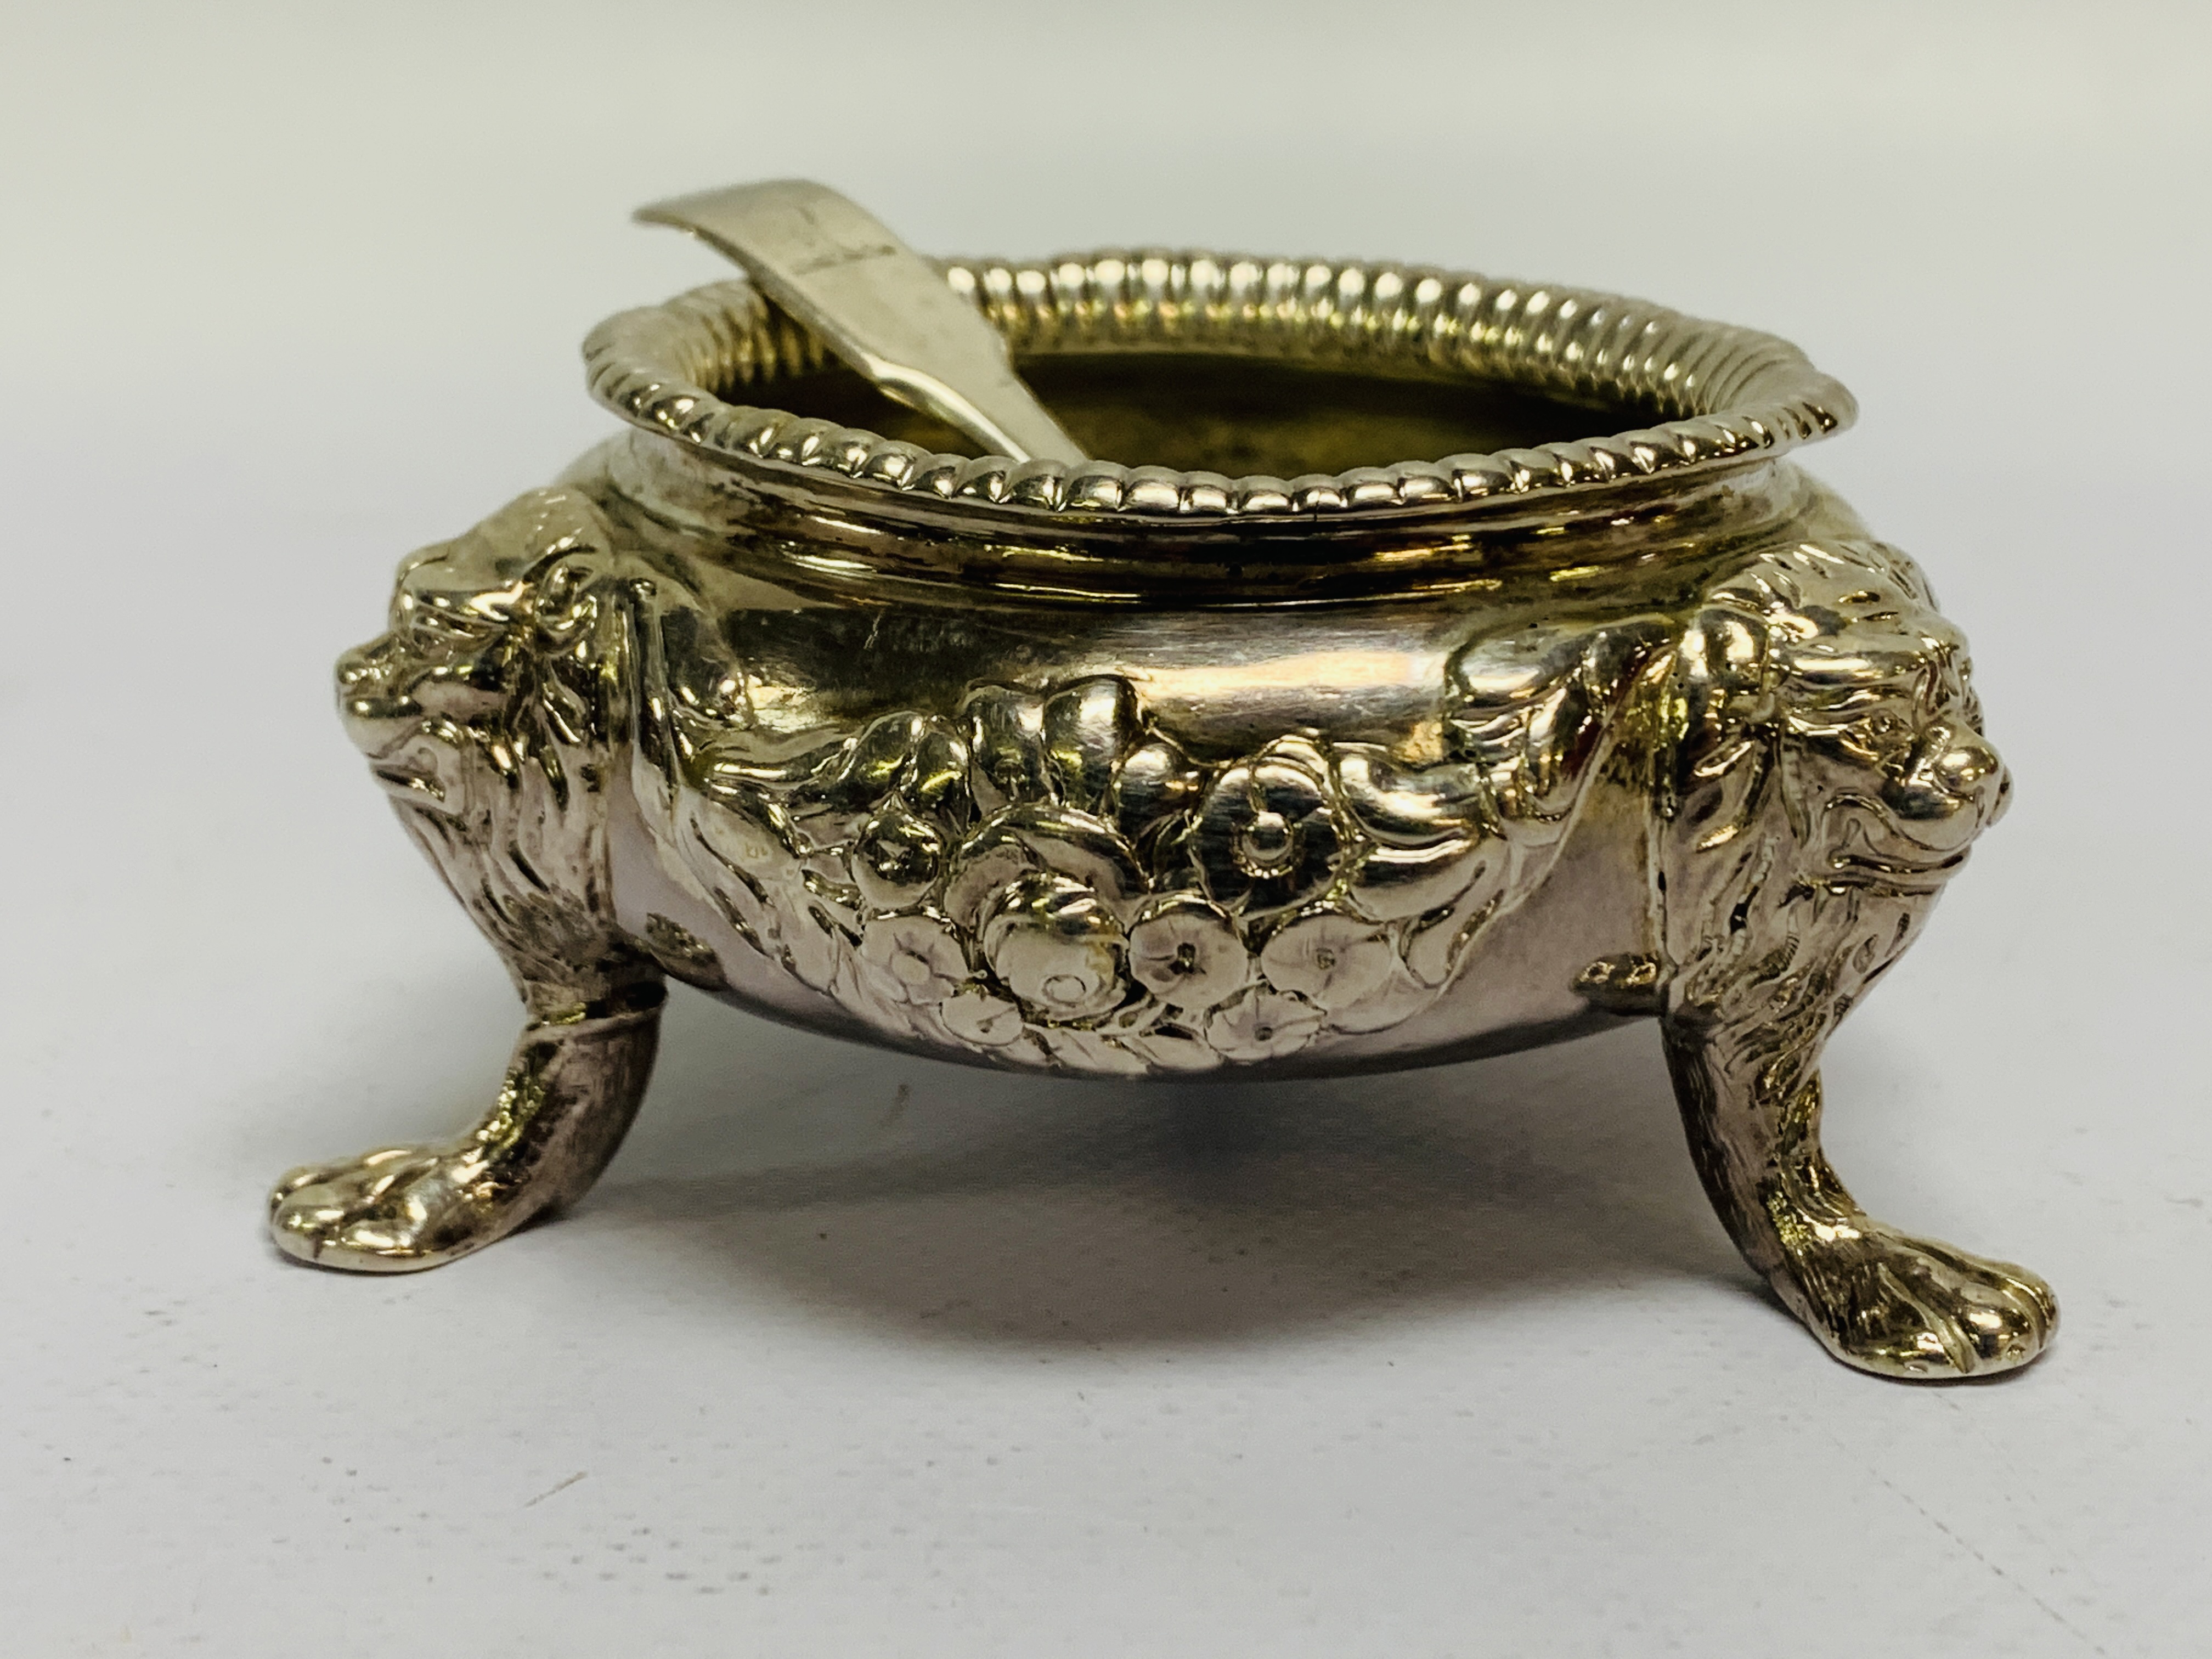 A GEORGE III IRISH TRIPOD SILVER SALT, HAVING LIONS' HEADS ABOVE LIONS' FEET SUPPORTS, - Image 7 of 10